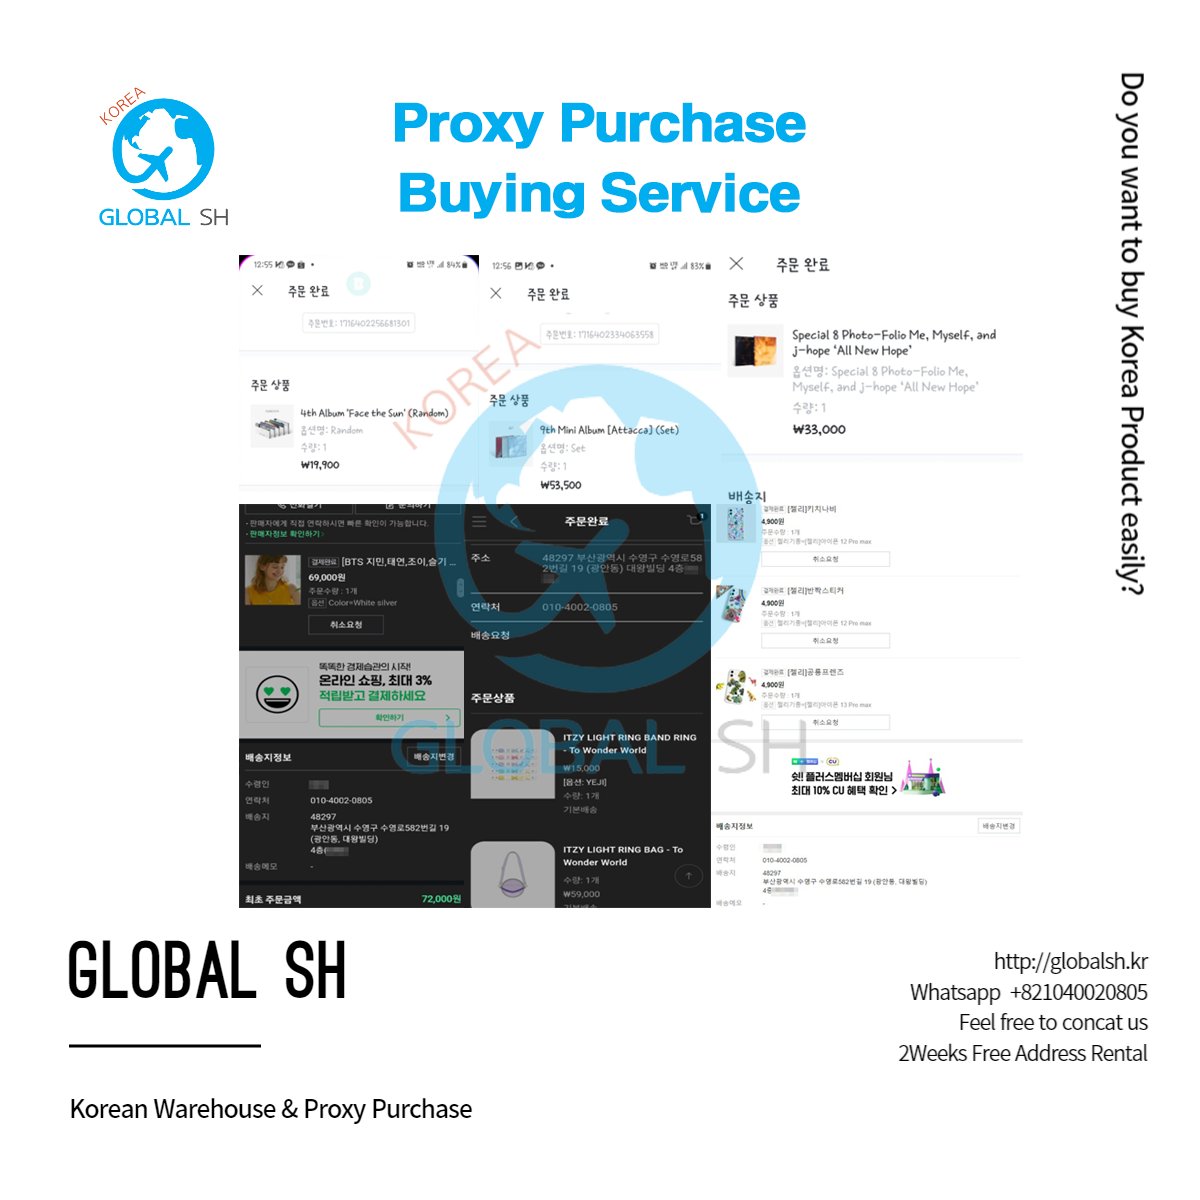 Buy Korean products by proxy.
We satisfy our customers with reasonable prices and fast service.
Trust us and try it.

buying agency agent proxy kpopgoods kpop album photocard kpopmerch kpopcollectors kpop fob pob inclusions korean address rental kpopsupplier light stick